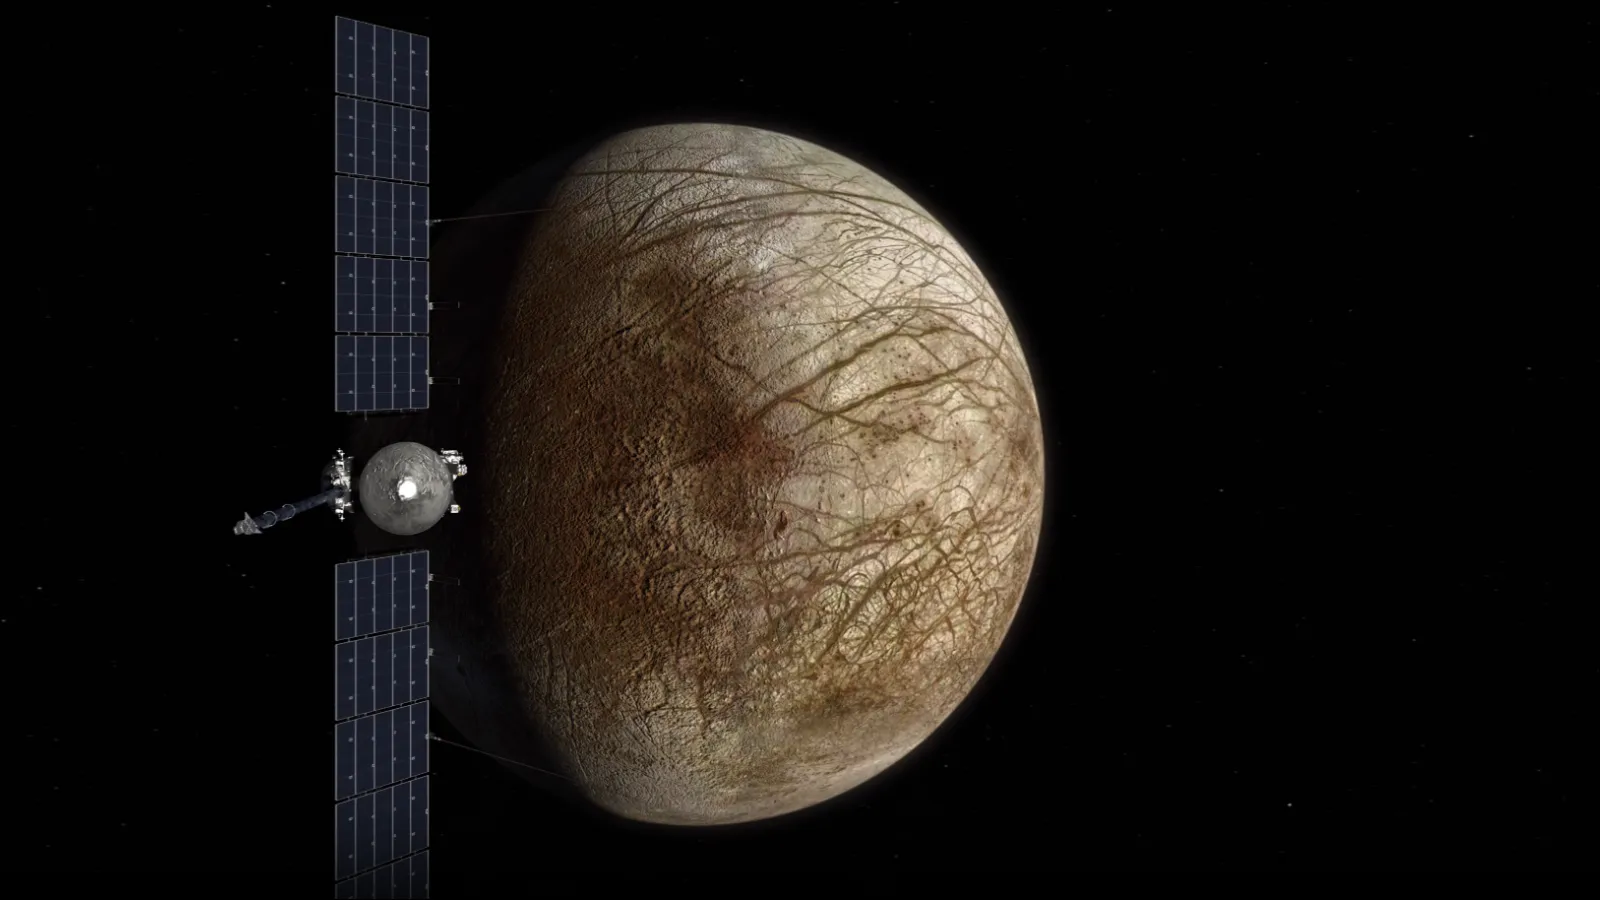 An animation of the Europa Clipper approaching Jupiter's Europa Moon. Image: NASA/JPL